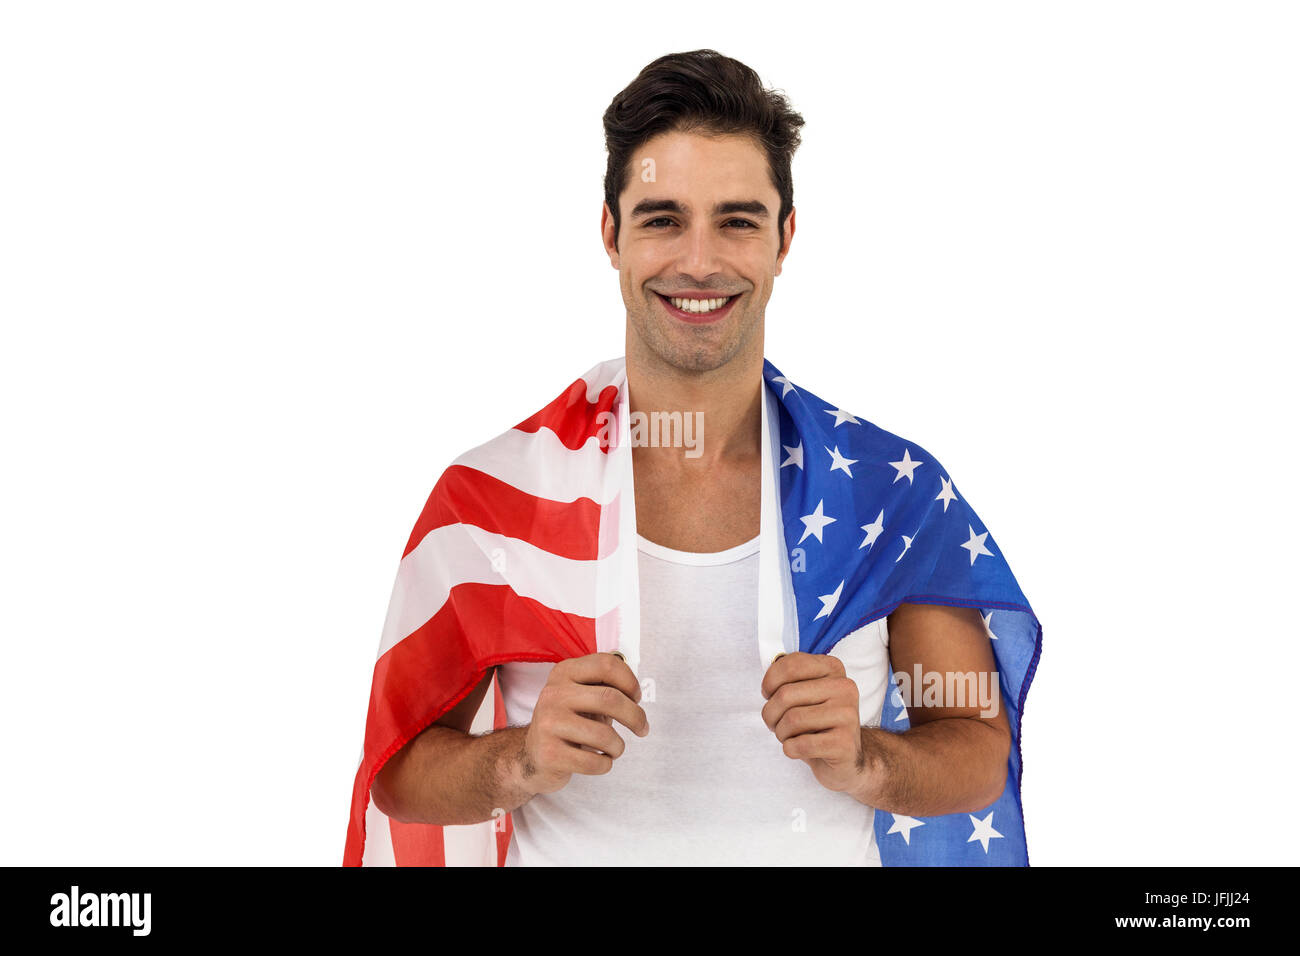 Athlete with american flag wrapped around his body Stock Photo